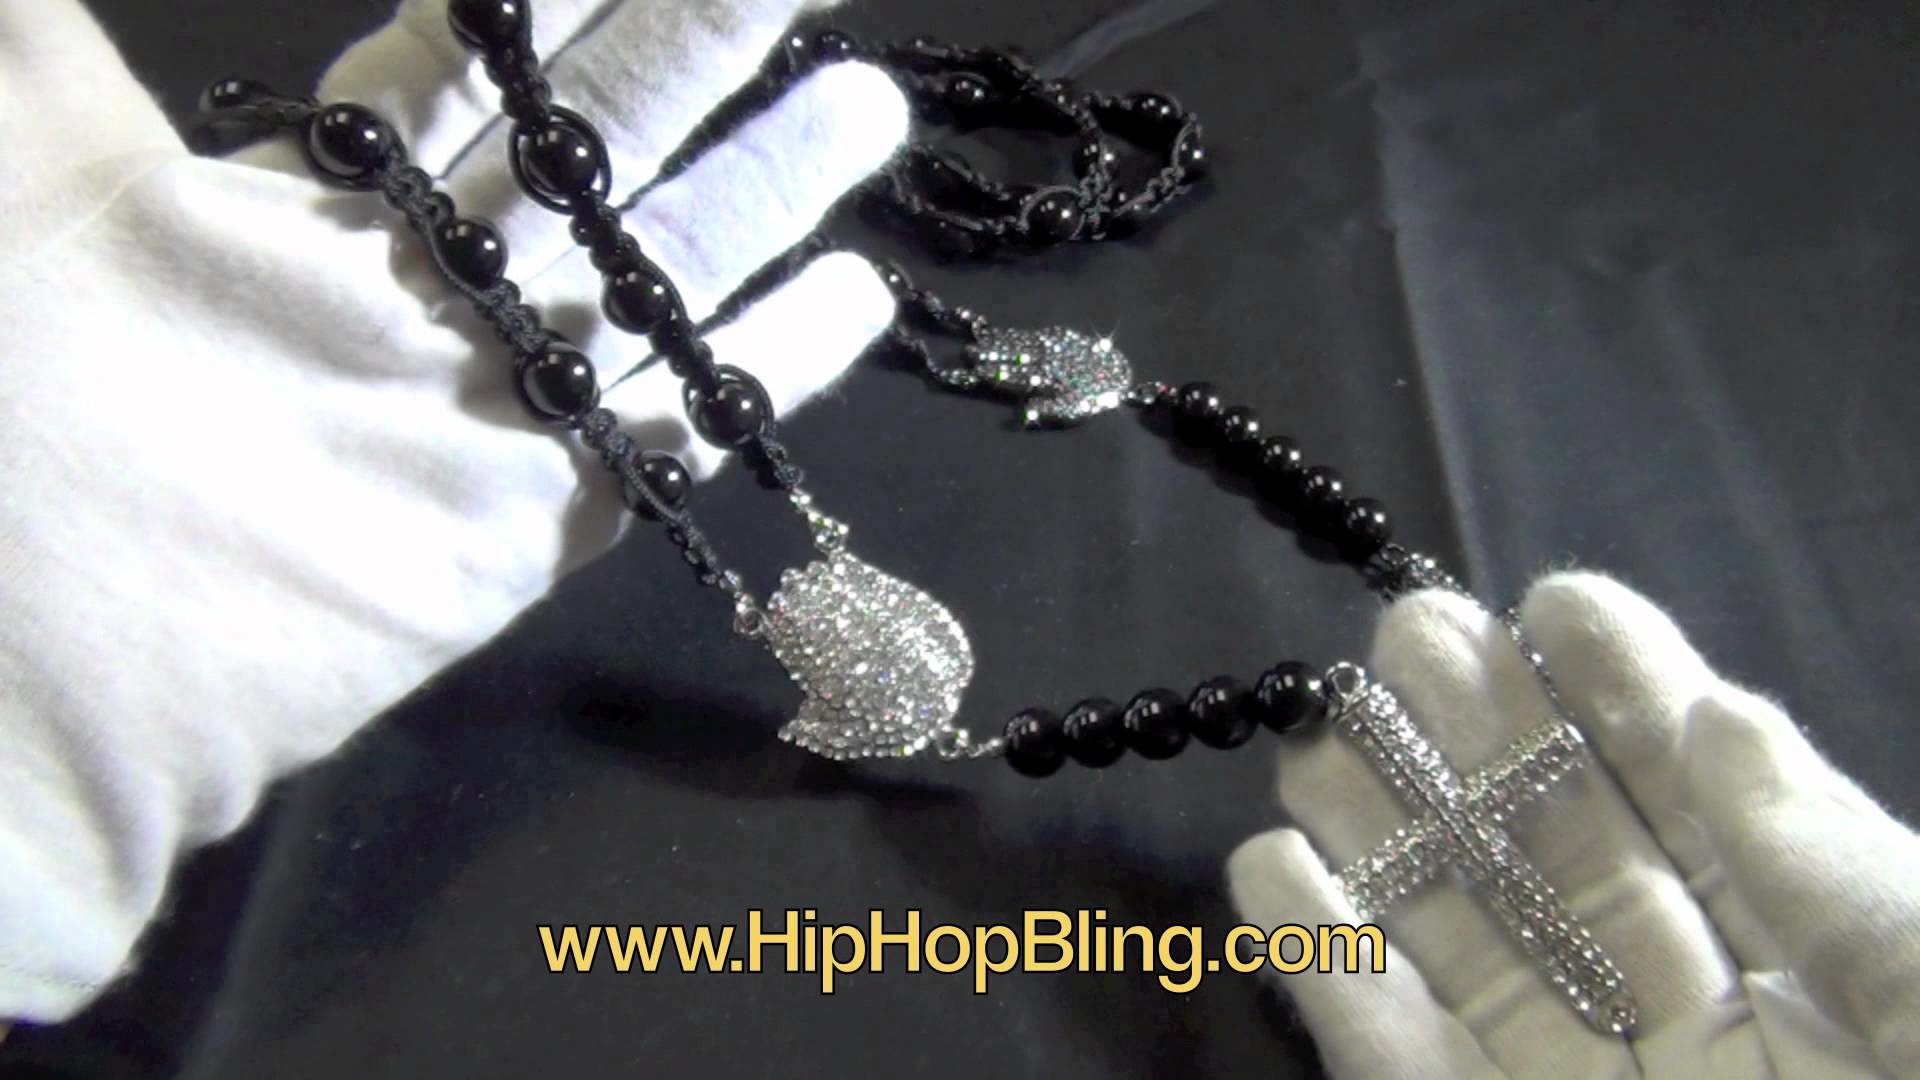 1920x1080  Disco Ball Rosary Necklaces With Bling Bling Praying Hands and  Cross - YouTube